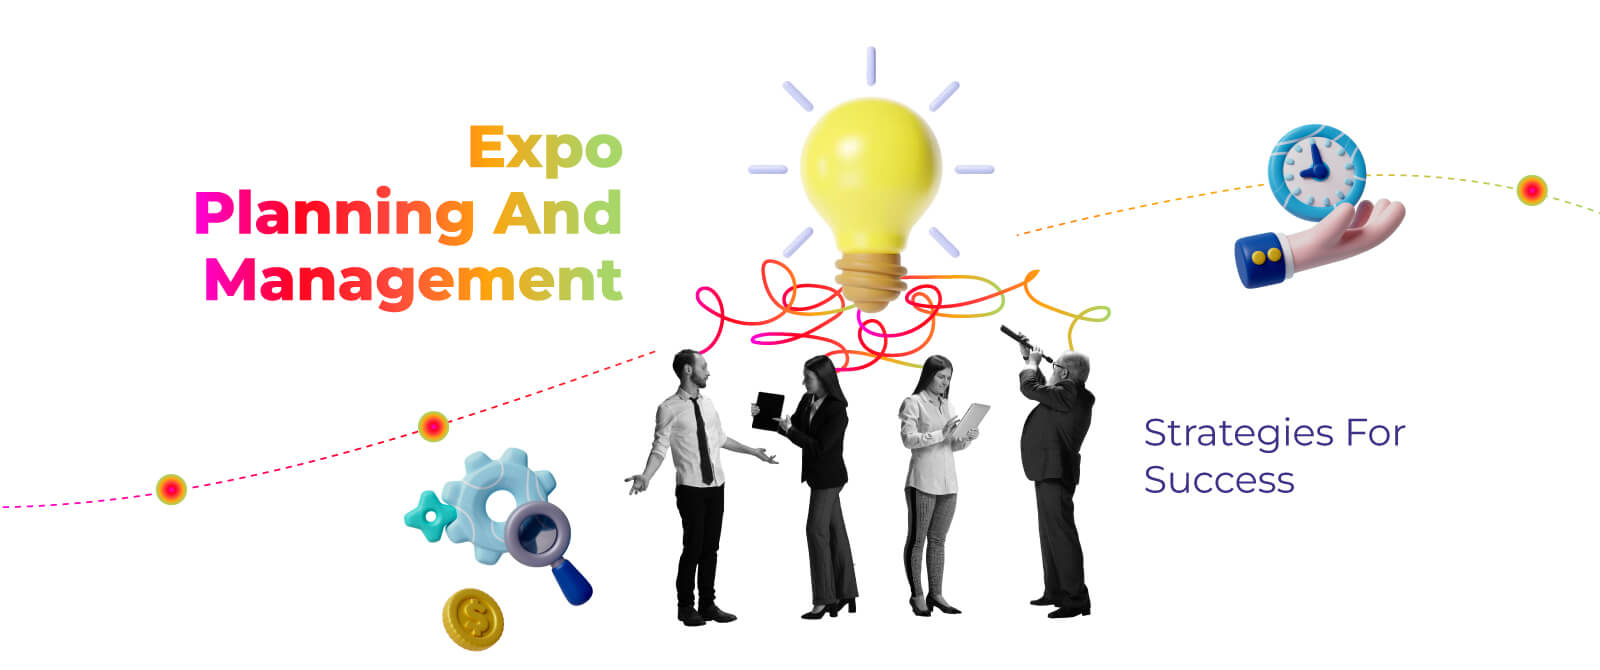 Expo Planning and Management: Strategies for Success